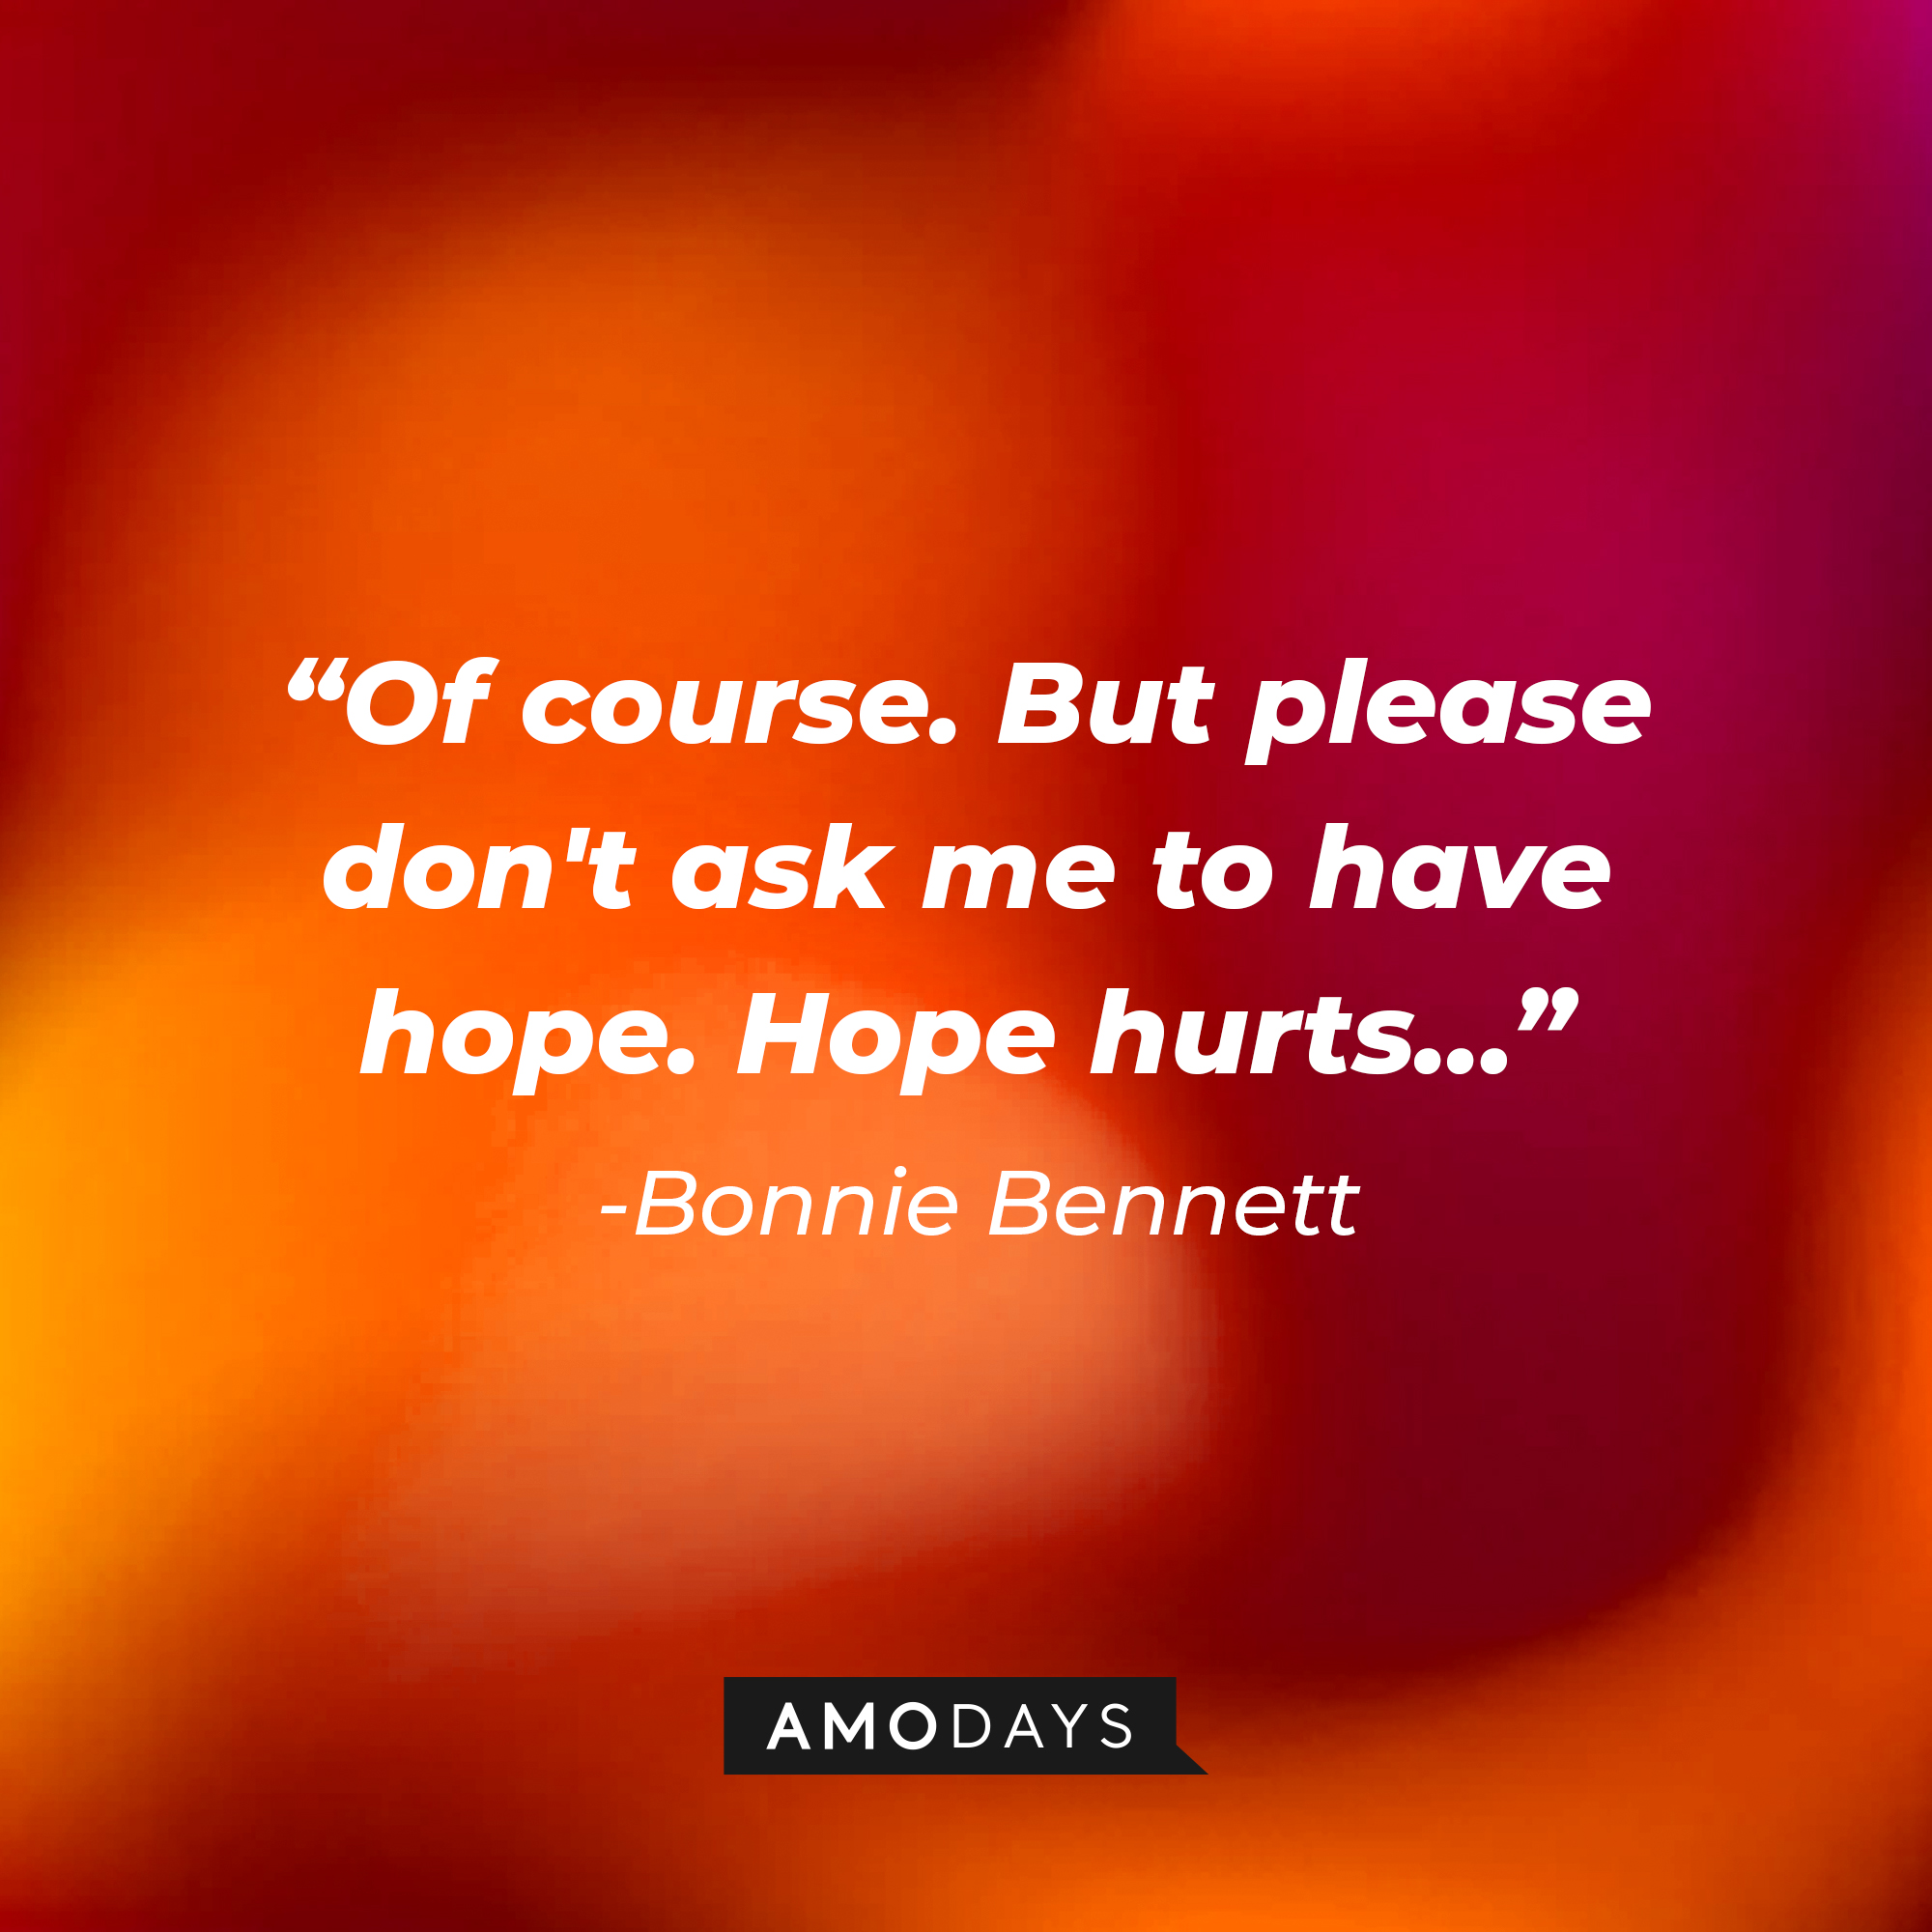 Bonnie Bennett’s quote: “Of course. But please don't ask me to have hope. Hope hurts…” | Source: AmoDays